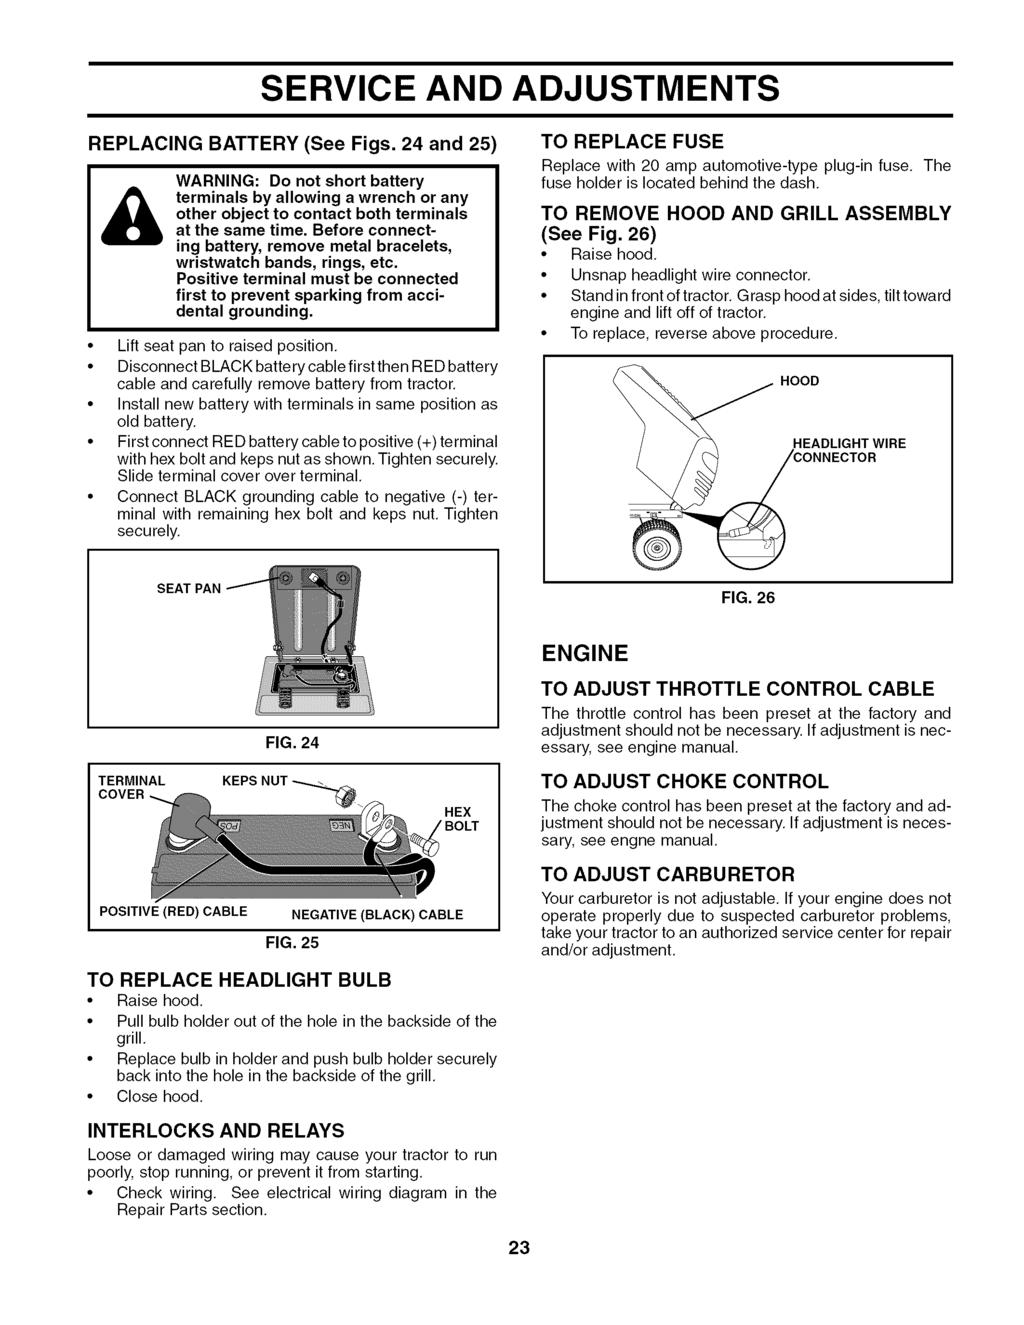 SERVICE AND ADJUSTMENTS REPLACING BATTERY (See Figs. 24 and 25 & WARNING: Do not short battery terminals by allowing a wrench or any other object to contact both terminals at the same time.